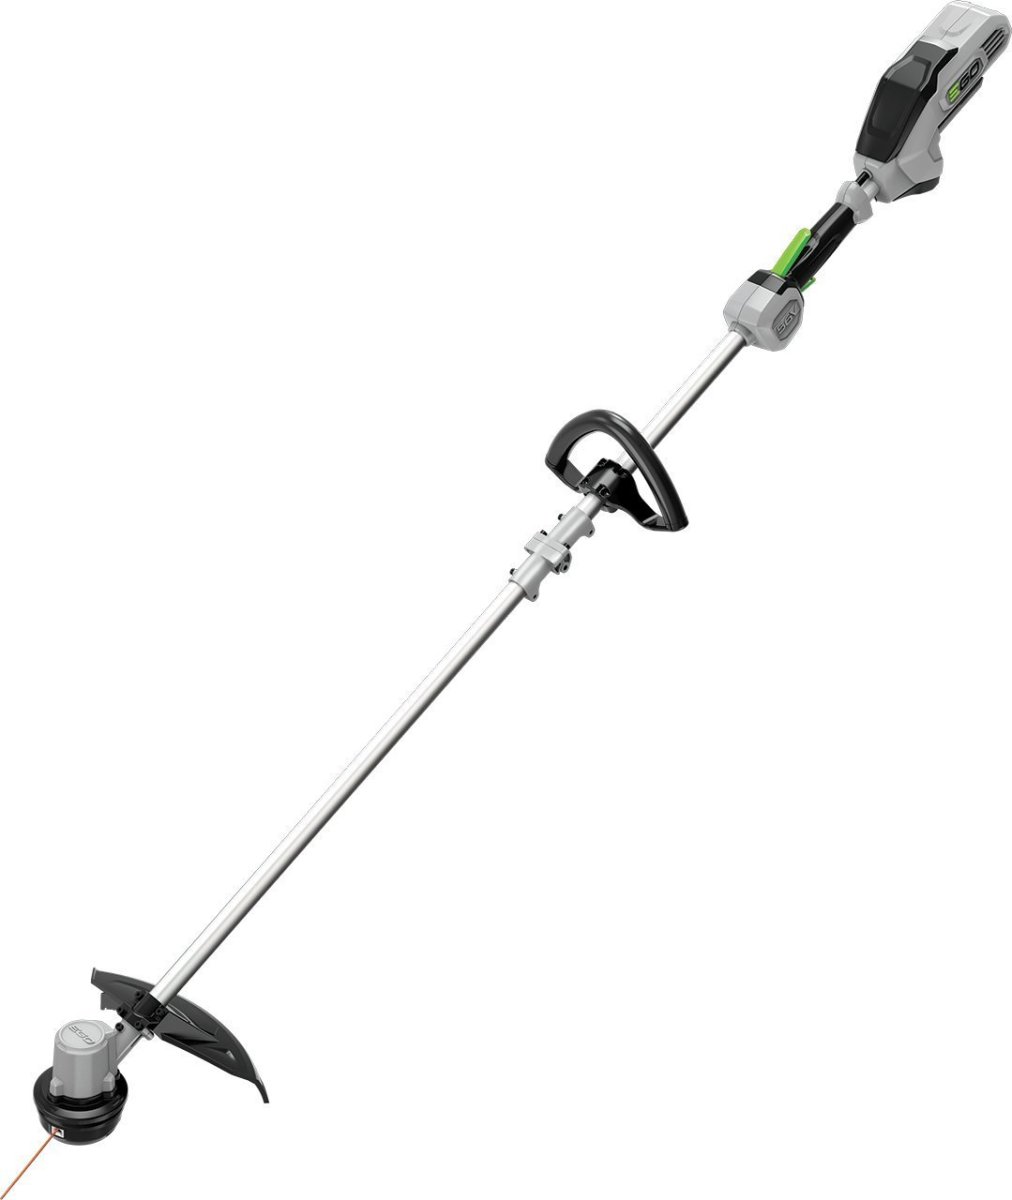 The EGO Power+ 15-Inch 56-Volt Lithium-Ion Cordless String Trimmer provides all the convenience of a gas trimmer, but without the noise and the mess. The newly designed battery is powerful and efficient enough to get most major yeard jobs done.